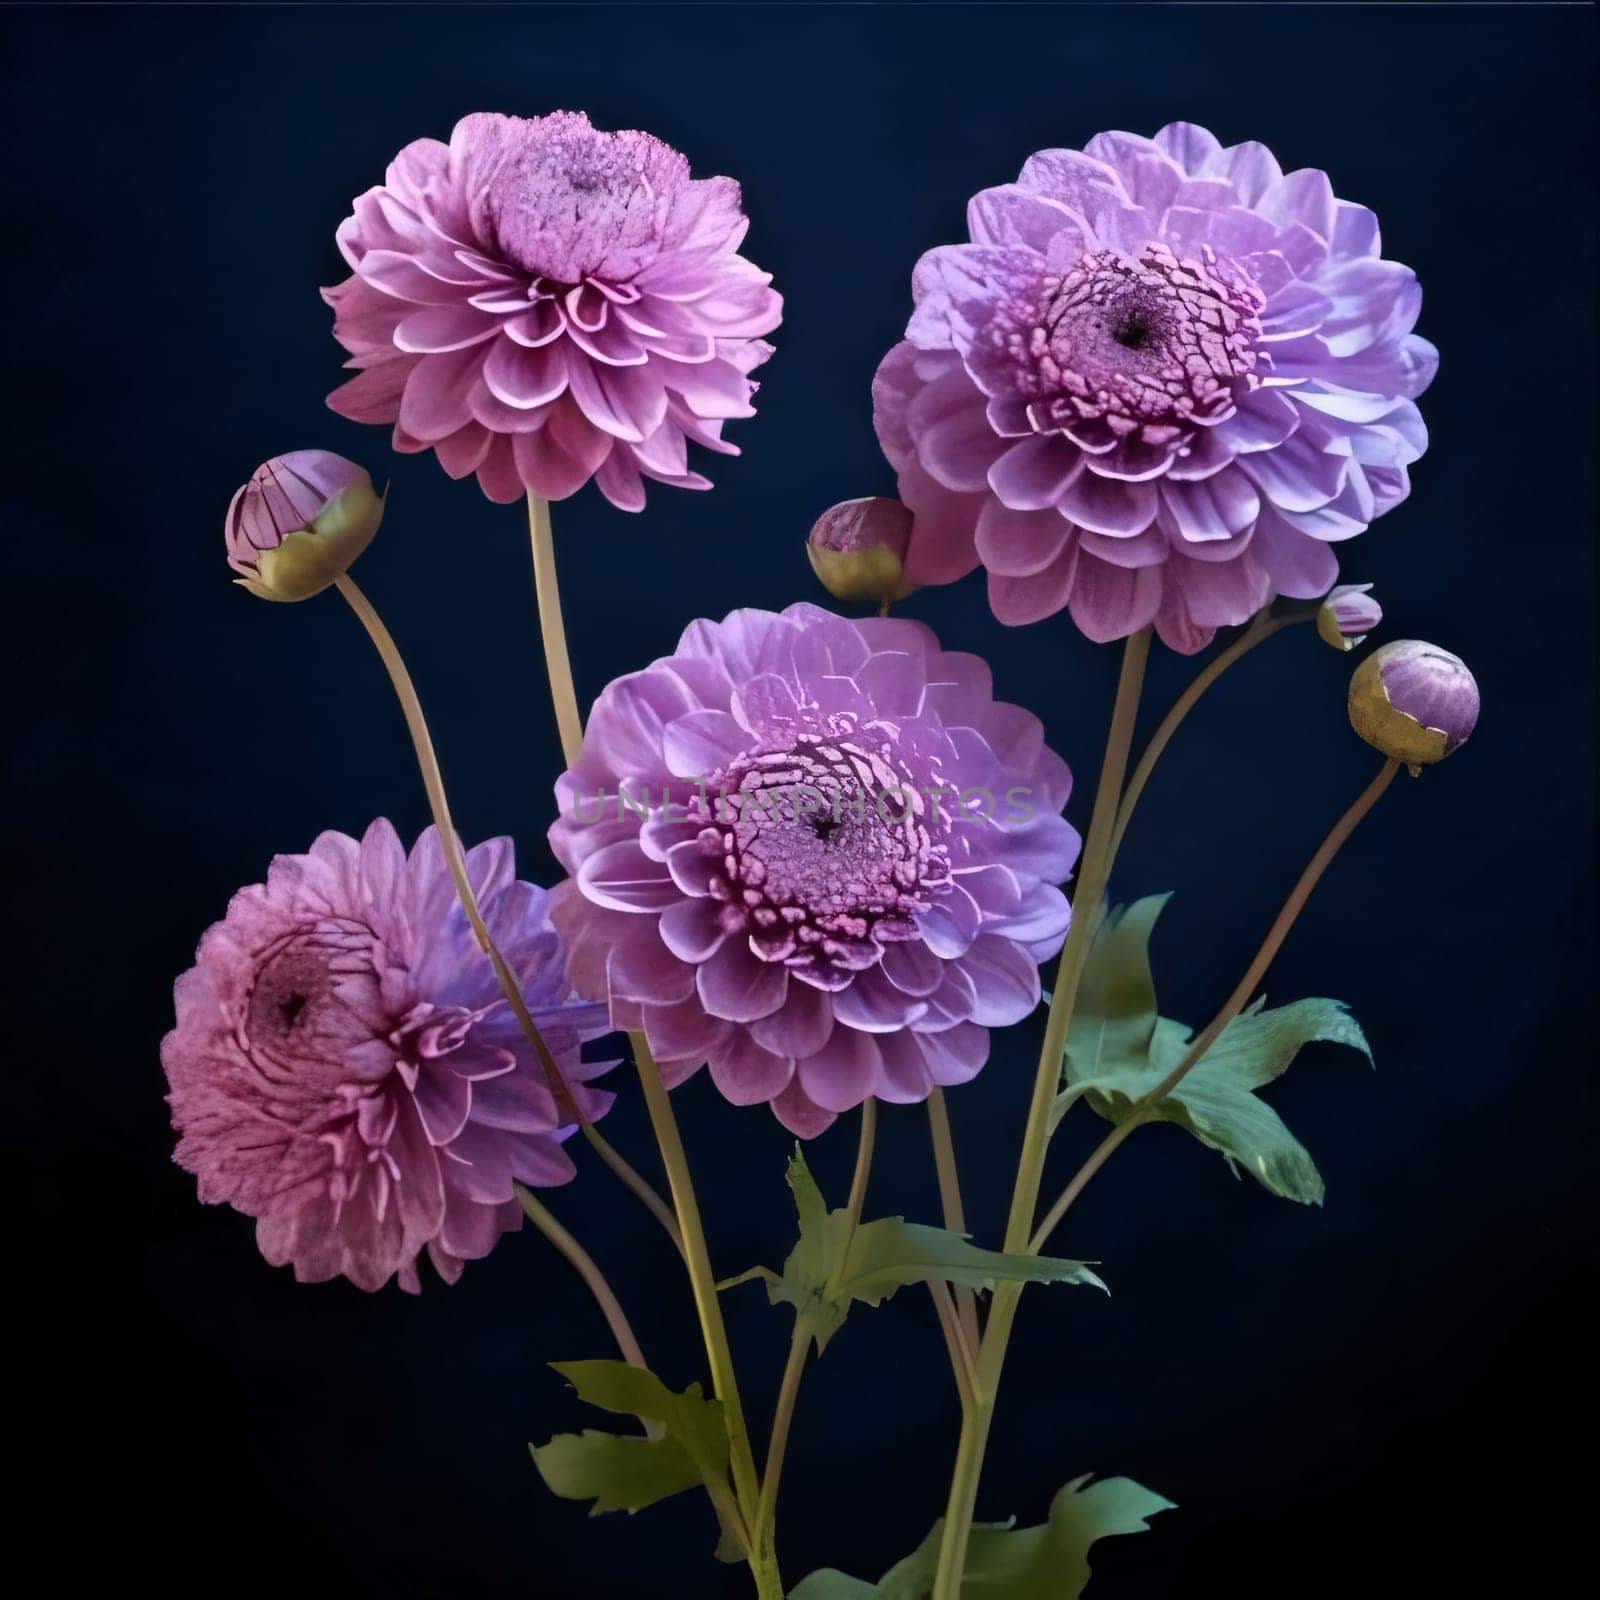 Pink and purple chrysanthemum flowers. Flowering flowers, a symbol of spring, new life. by ThemesS